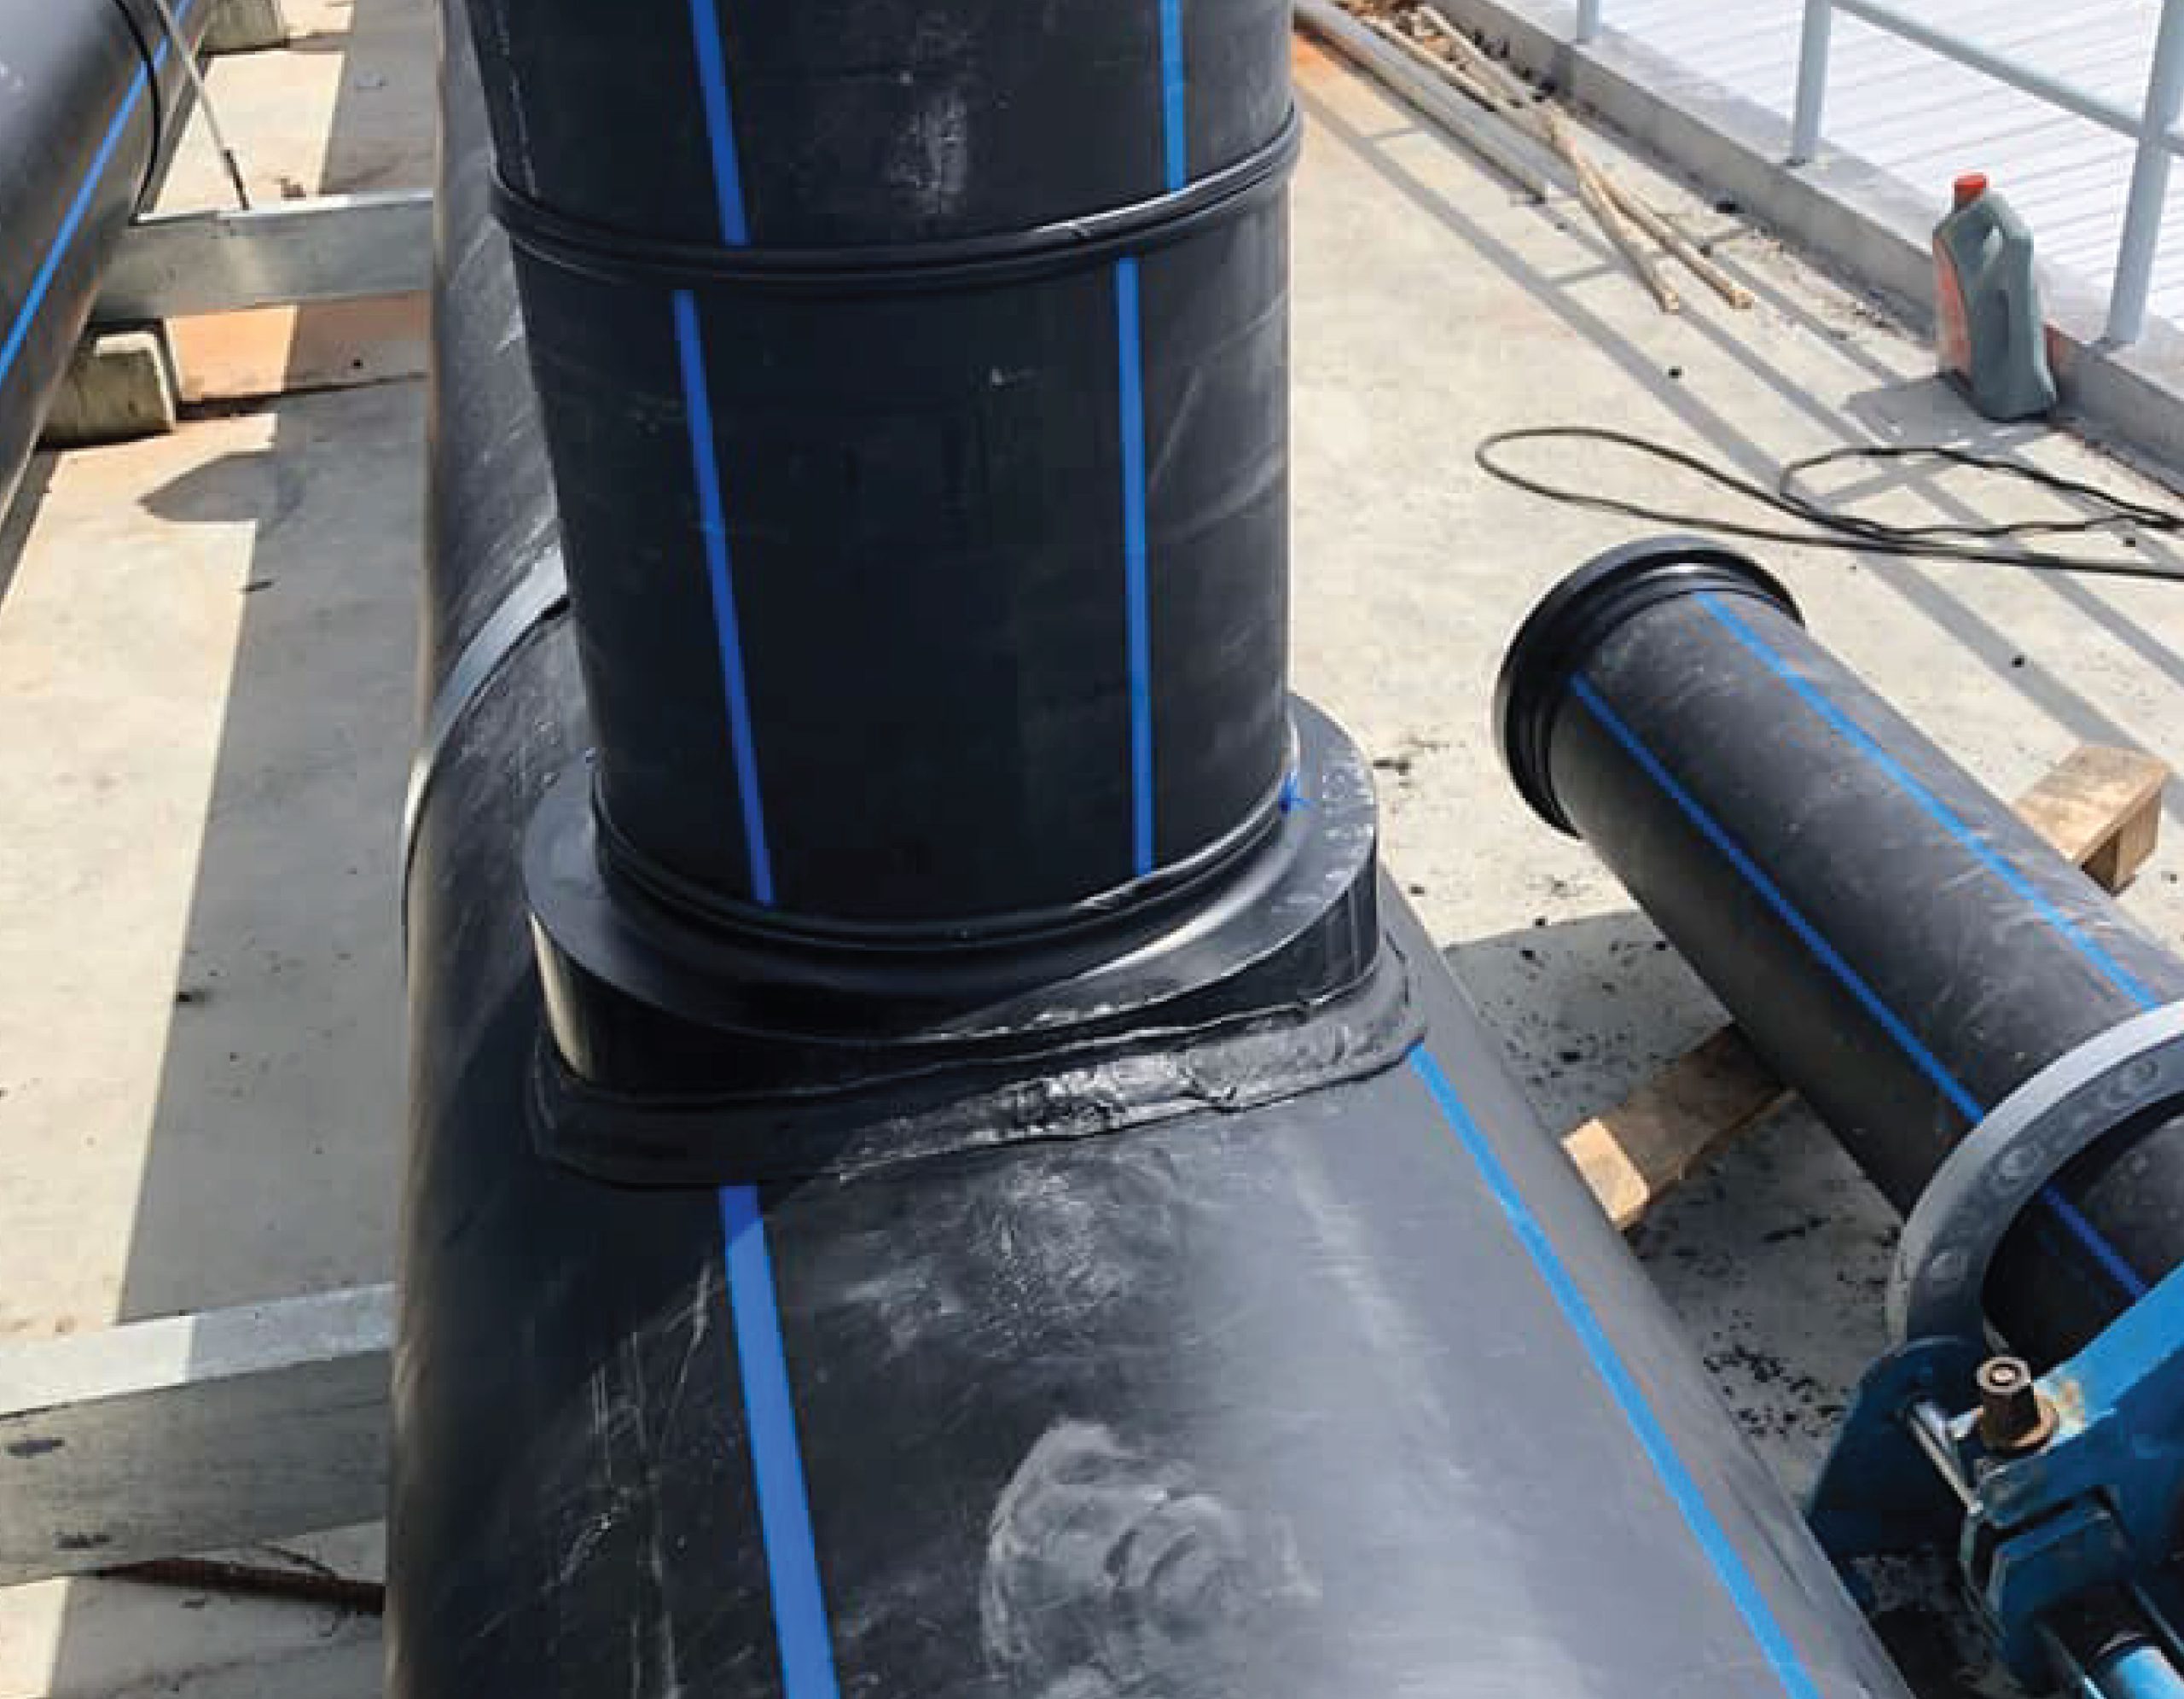 Butt-fusion welding of HDPE pipe joints of a cooling system installed at Robinson, Phuket